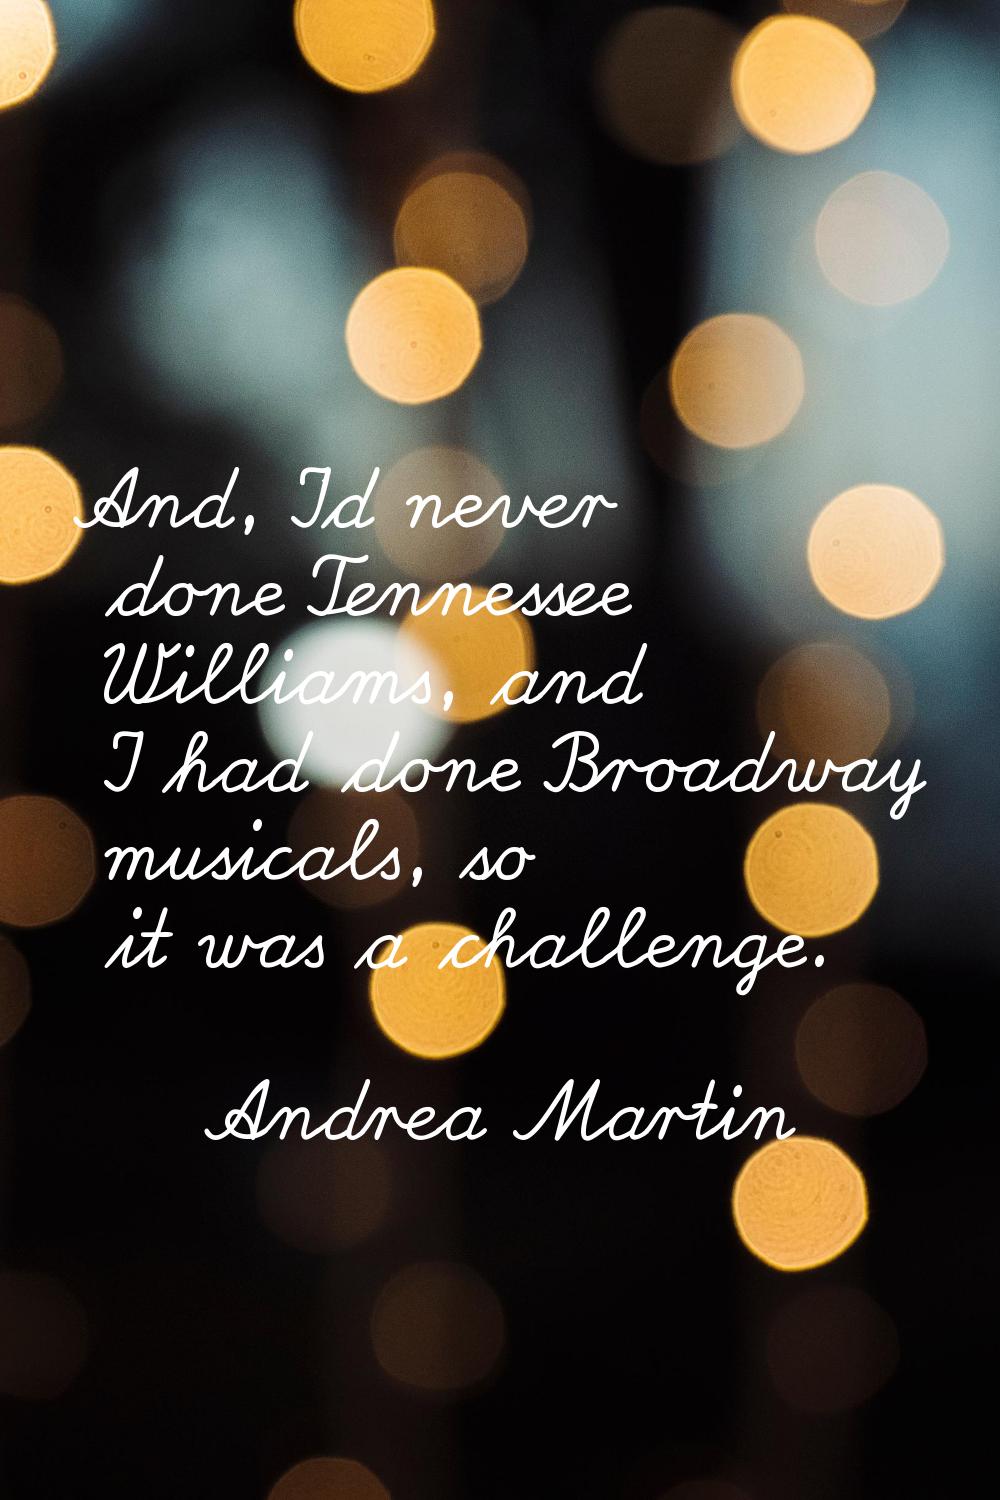 And, I'd never done Tennessee Williams, and I had done Broadway musicals, so it was a challenge.